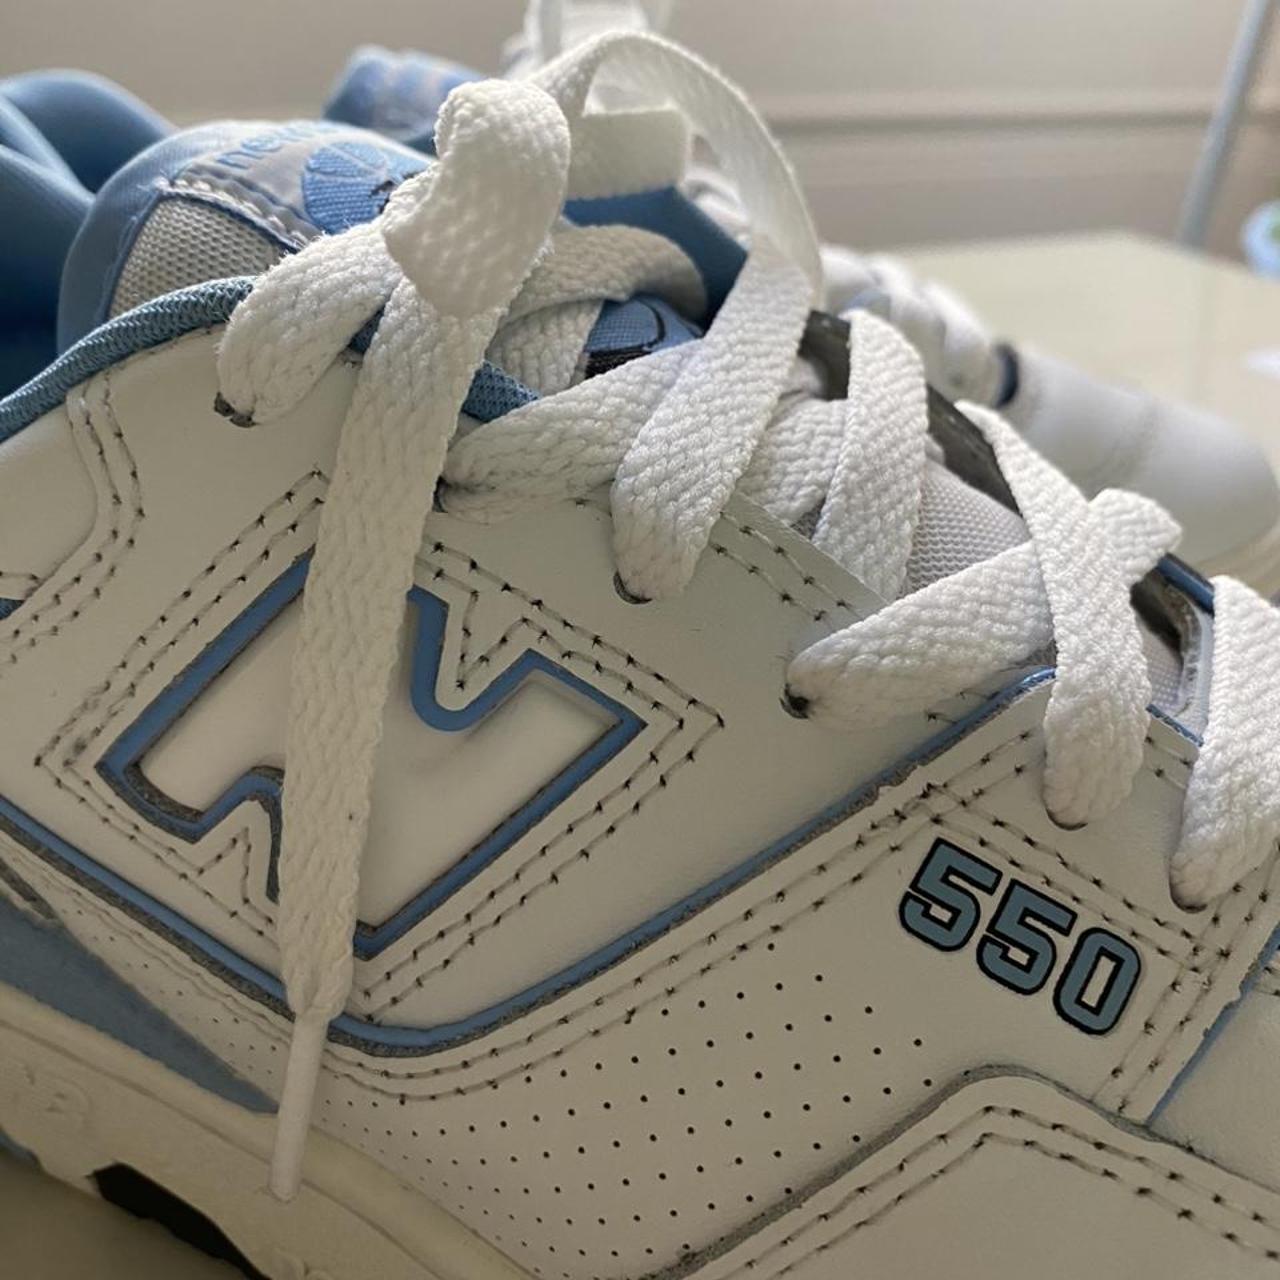 New Balance Women's Blue and White Trainers (4)